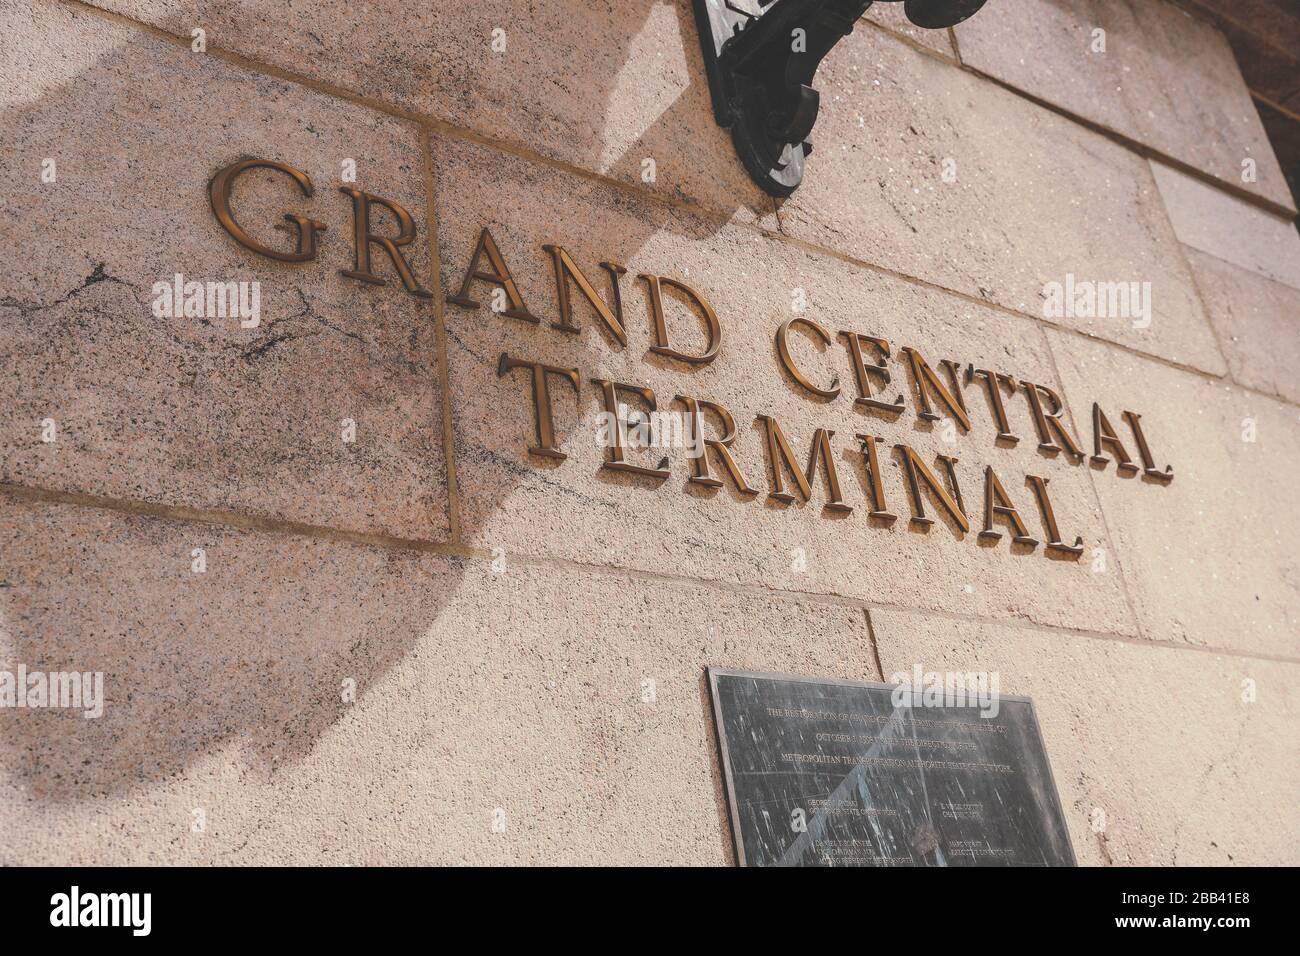 Grand Central terminal Sign, New York Banque D'Images